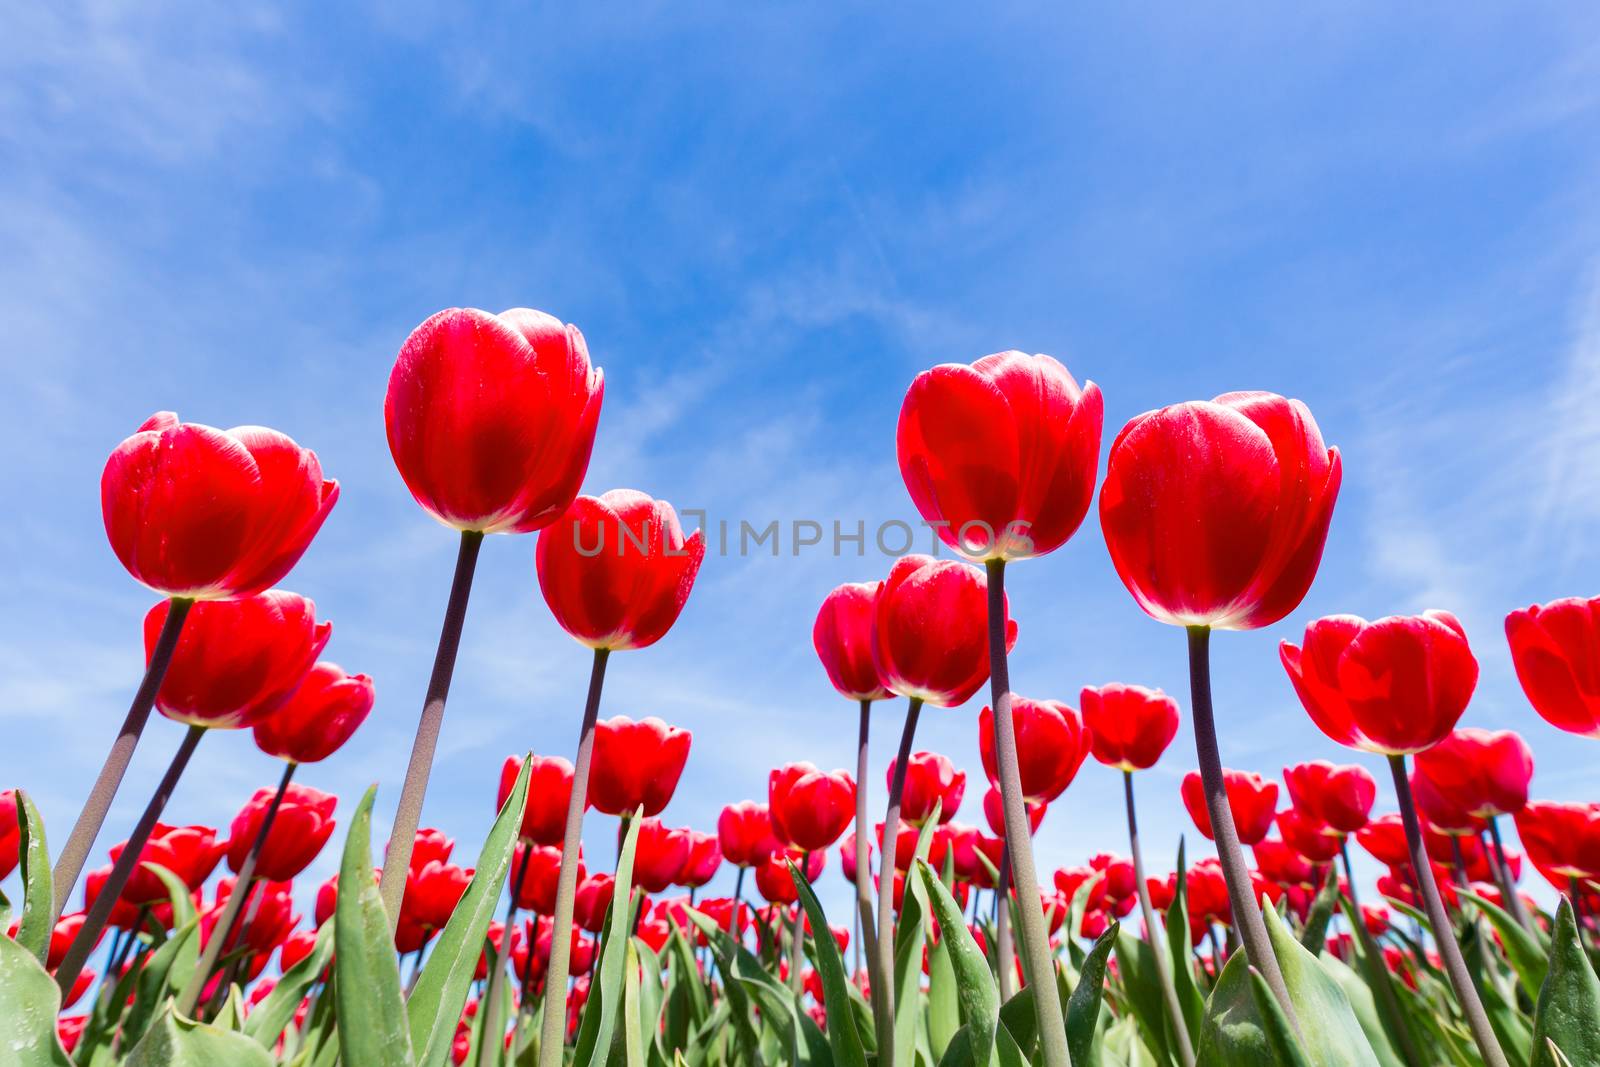 Red tulips field from below with blue sky by BenSchonewille